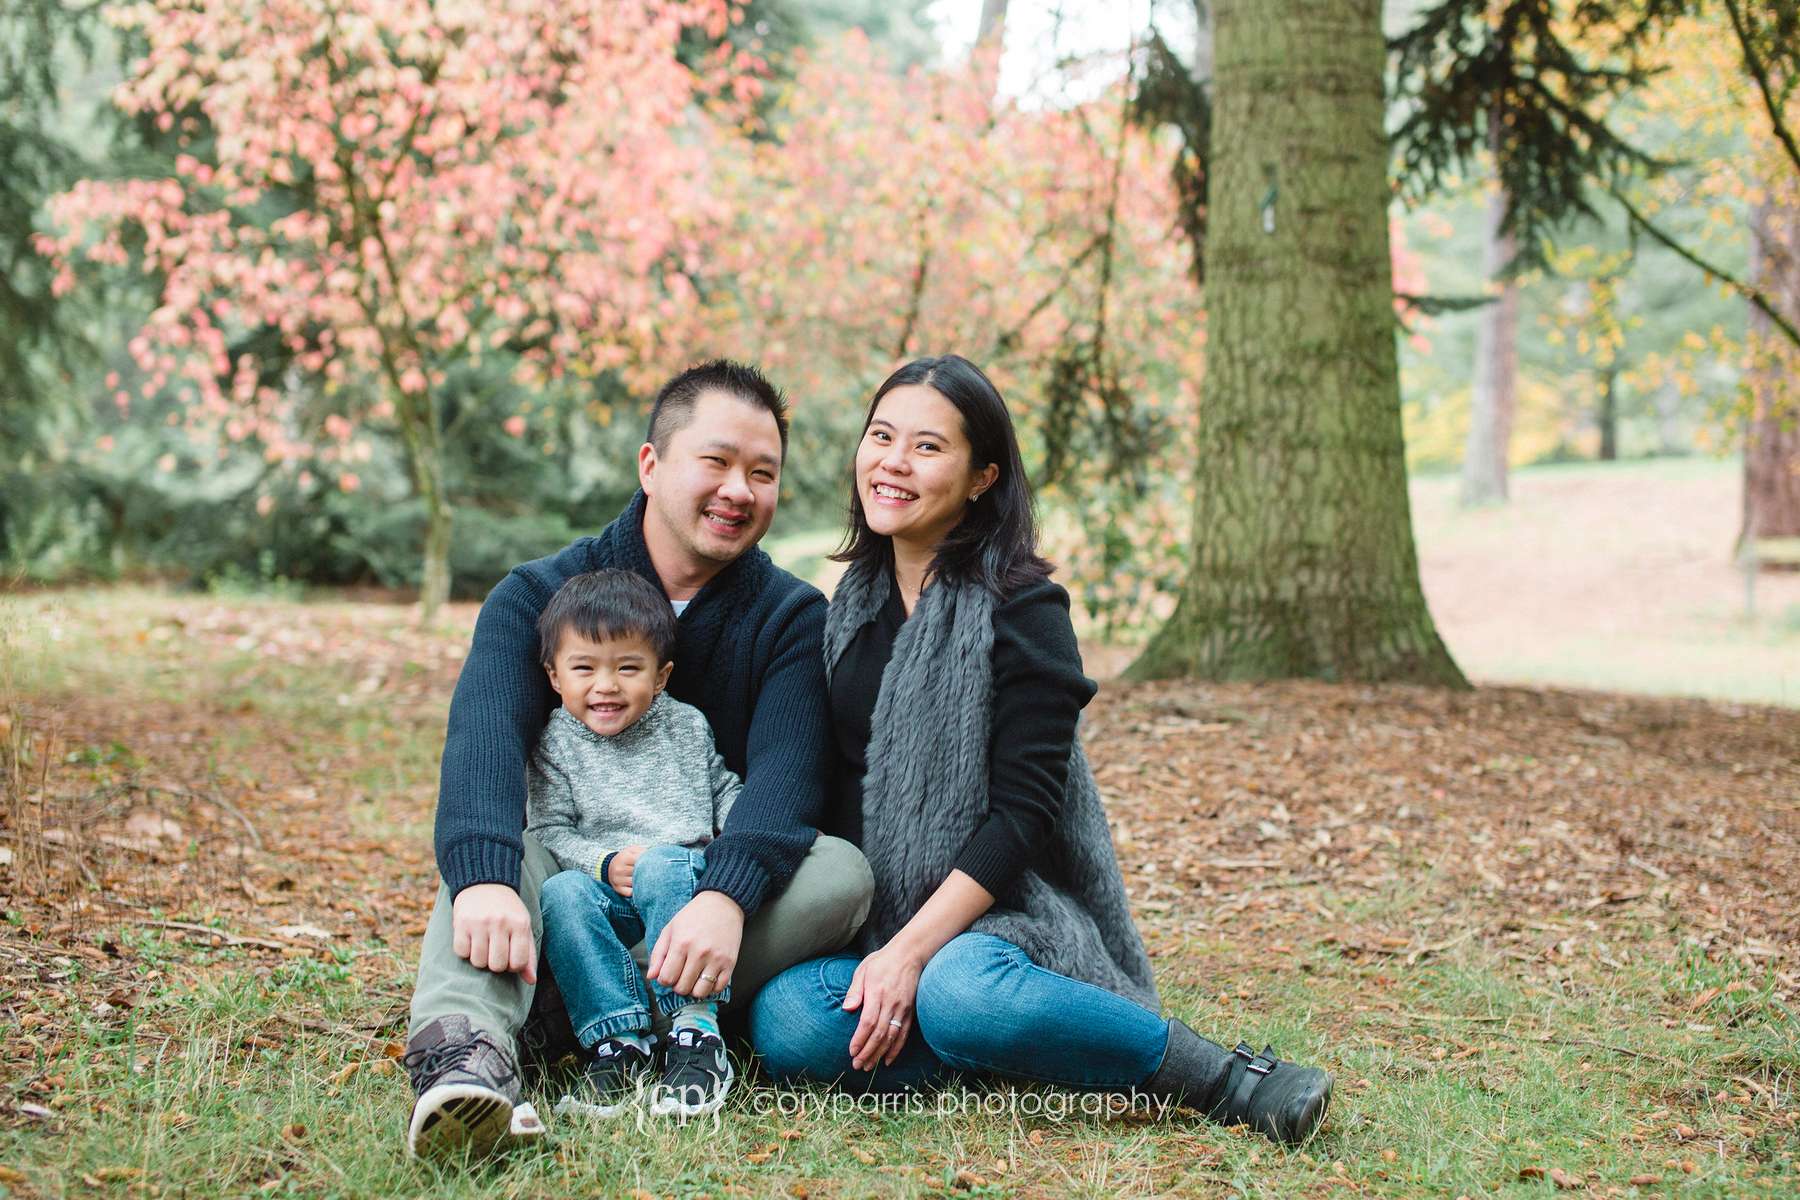 Seattle family portraits in the fall leaves